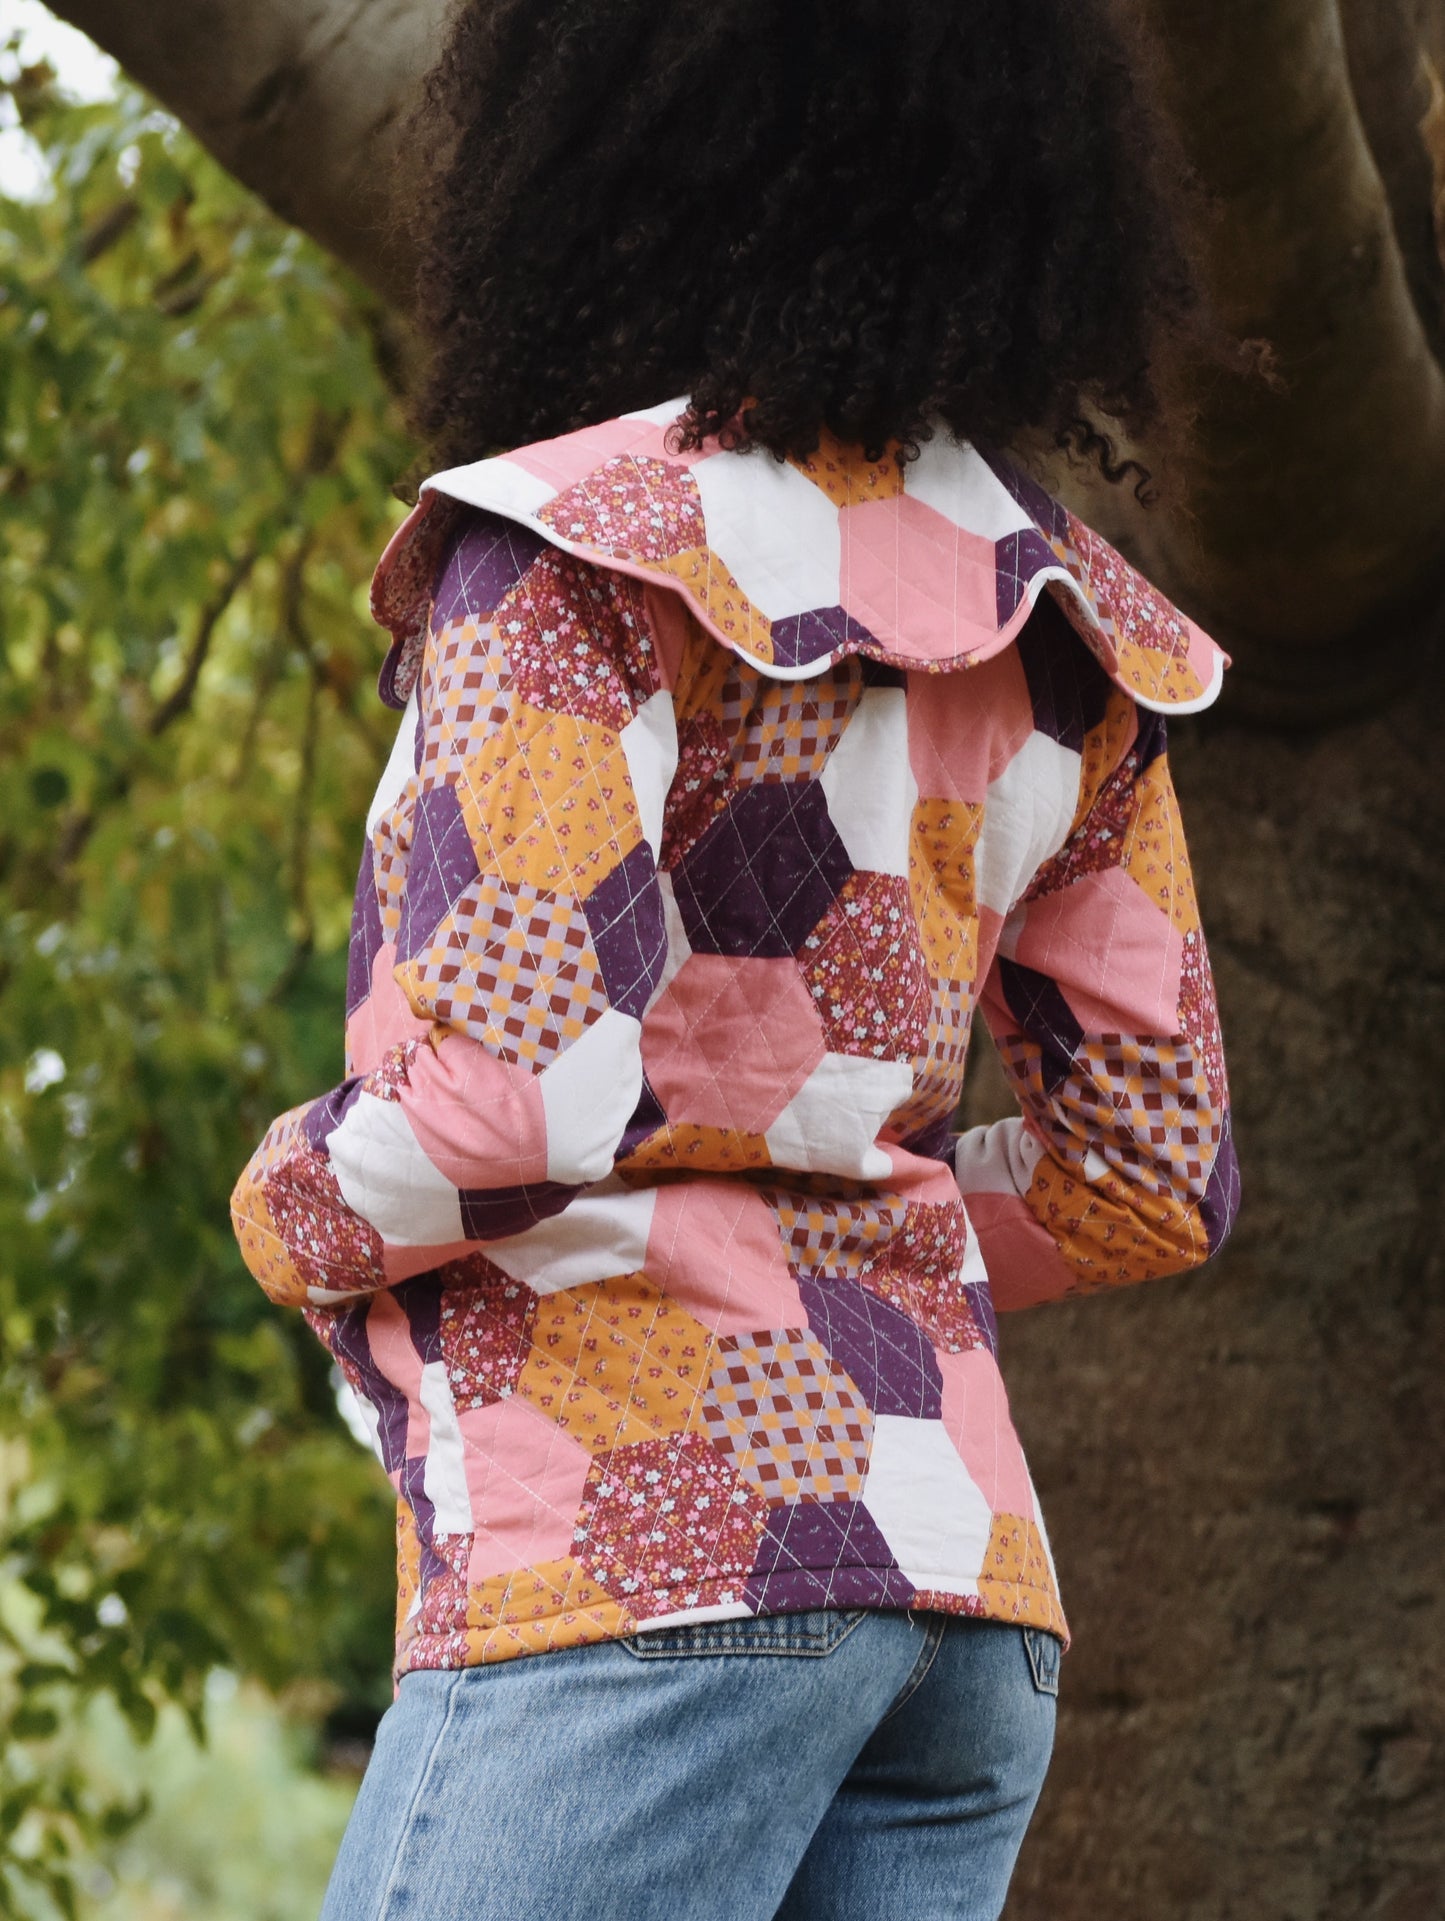 100% RECYCLED COTTON - PEMBROKE REVERSIBLE QUILTED JACKET IN HEXIE PATCHWORK PRINT